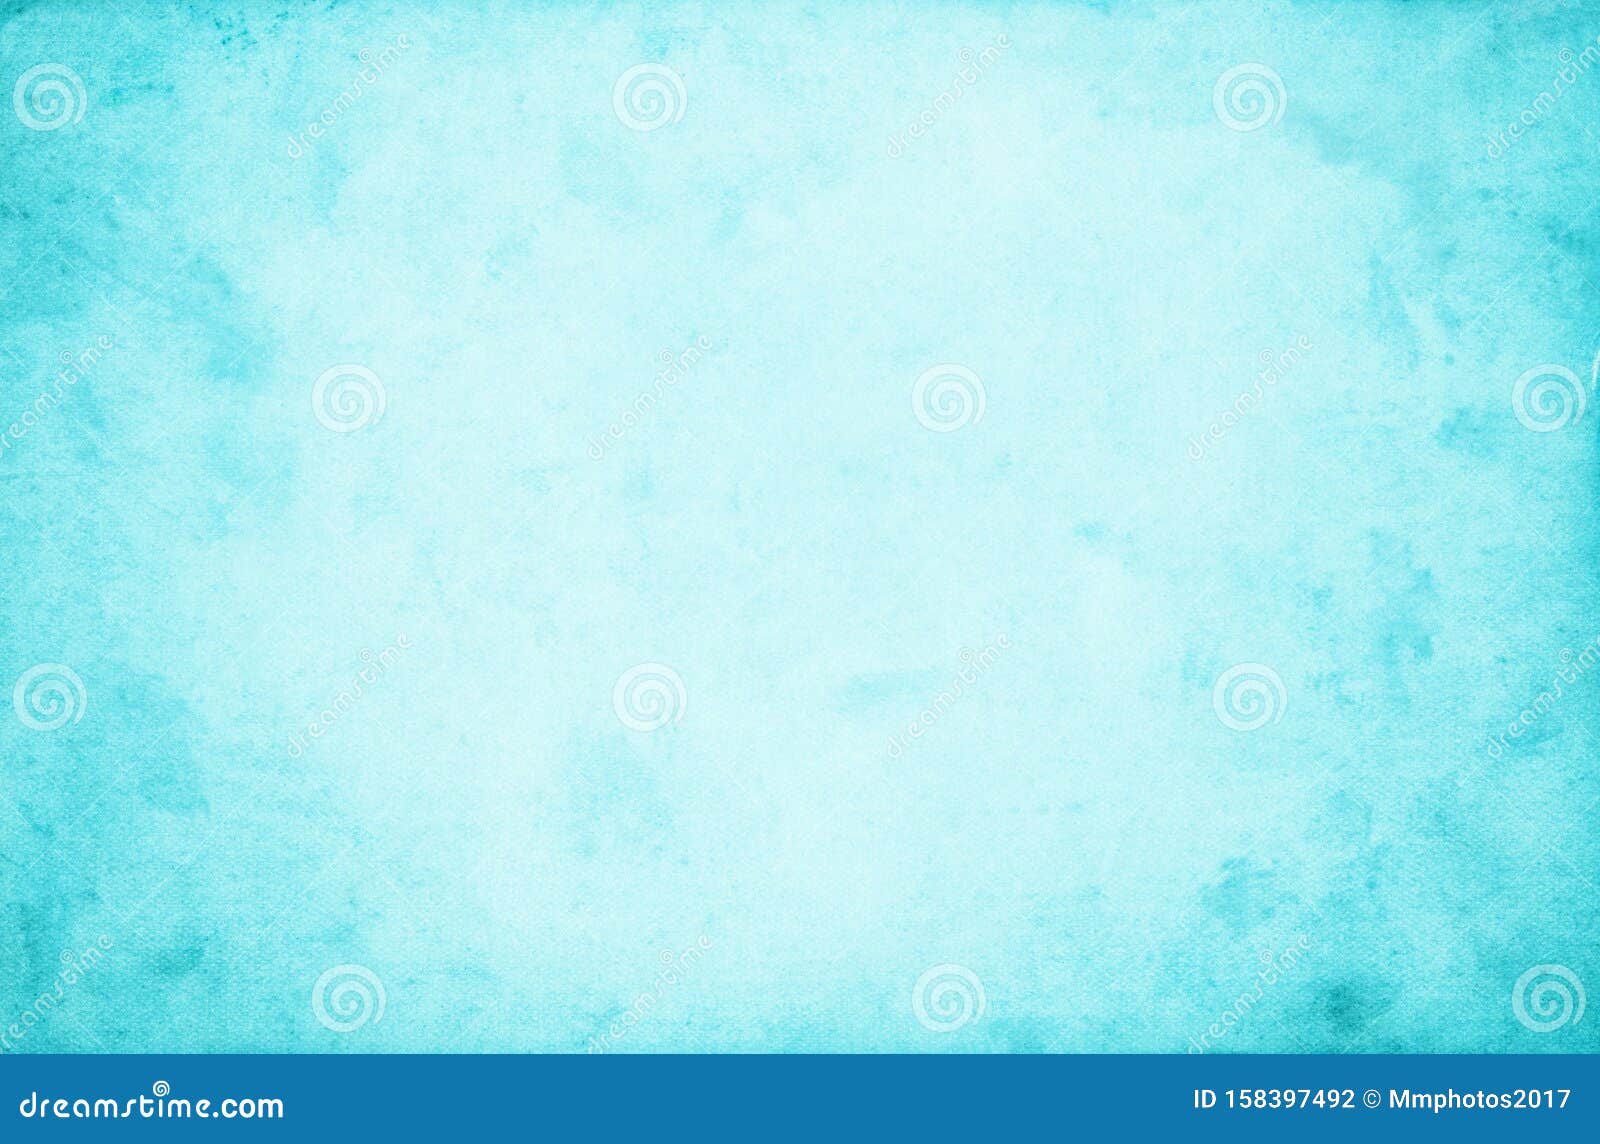 Sky Blue Paper Texture Background Stock Photo - Image of dirty, bright:  158397492